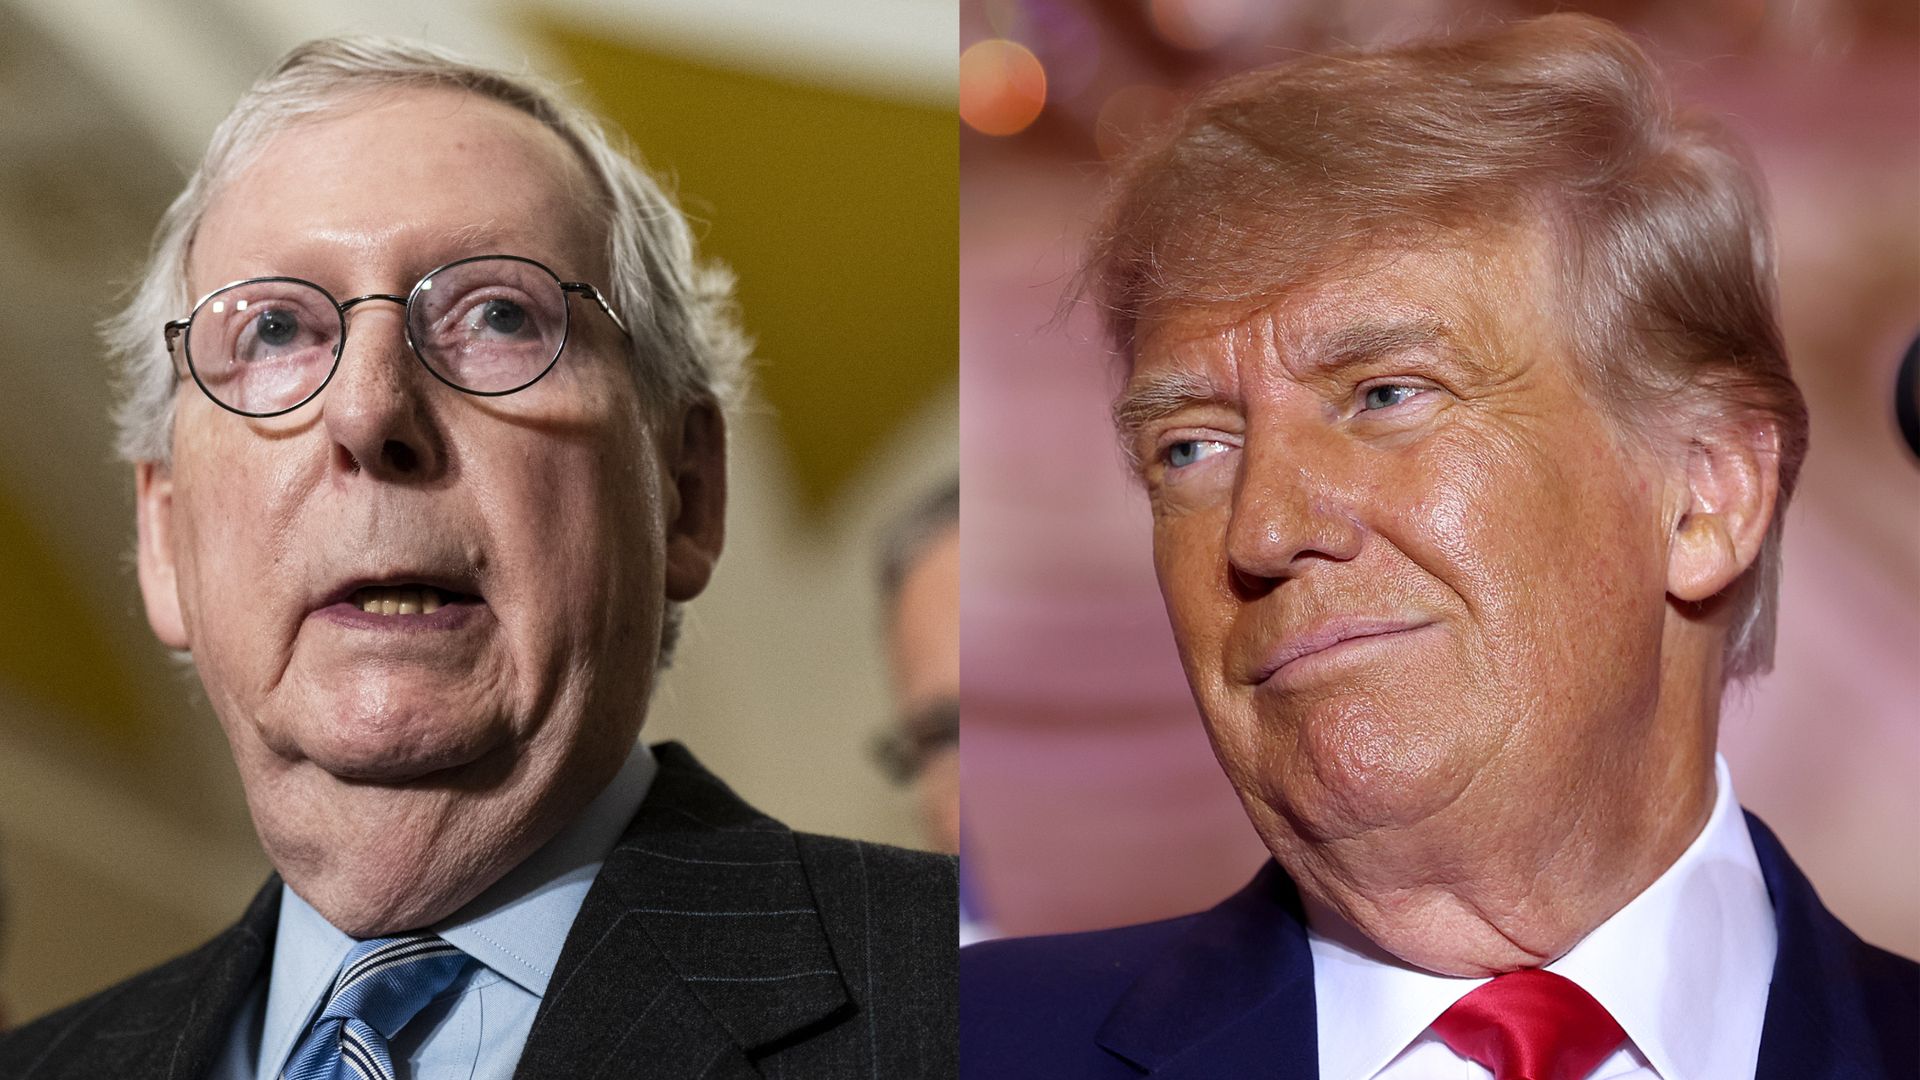 Photo of Mitch McConnell speaking on the left and Donald Trump smiling on the right